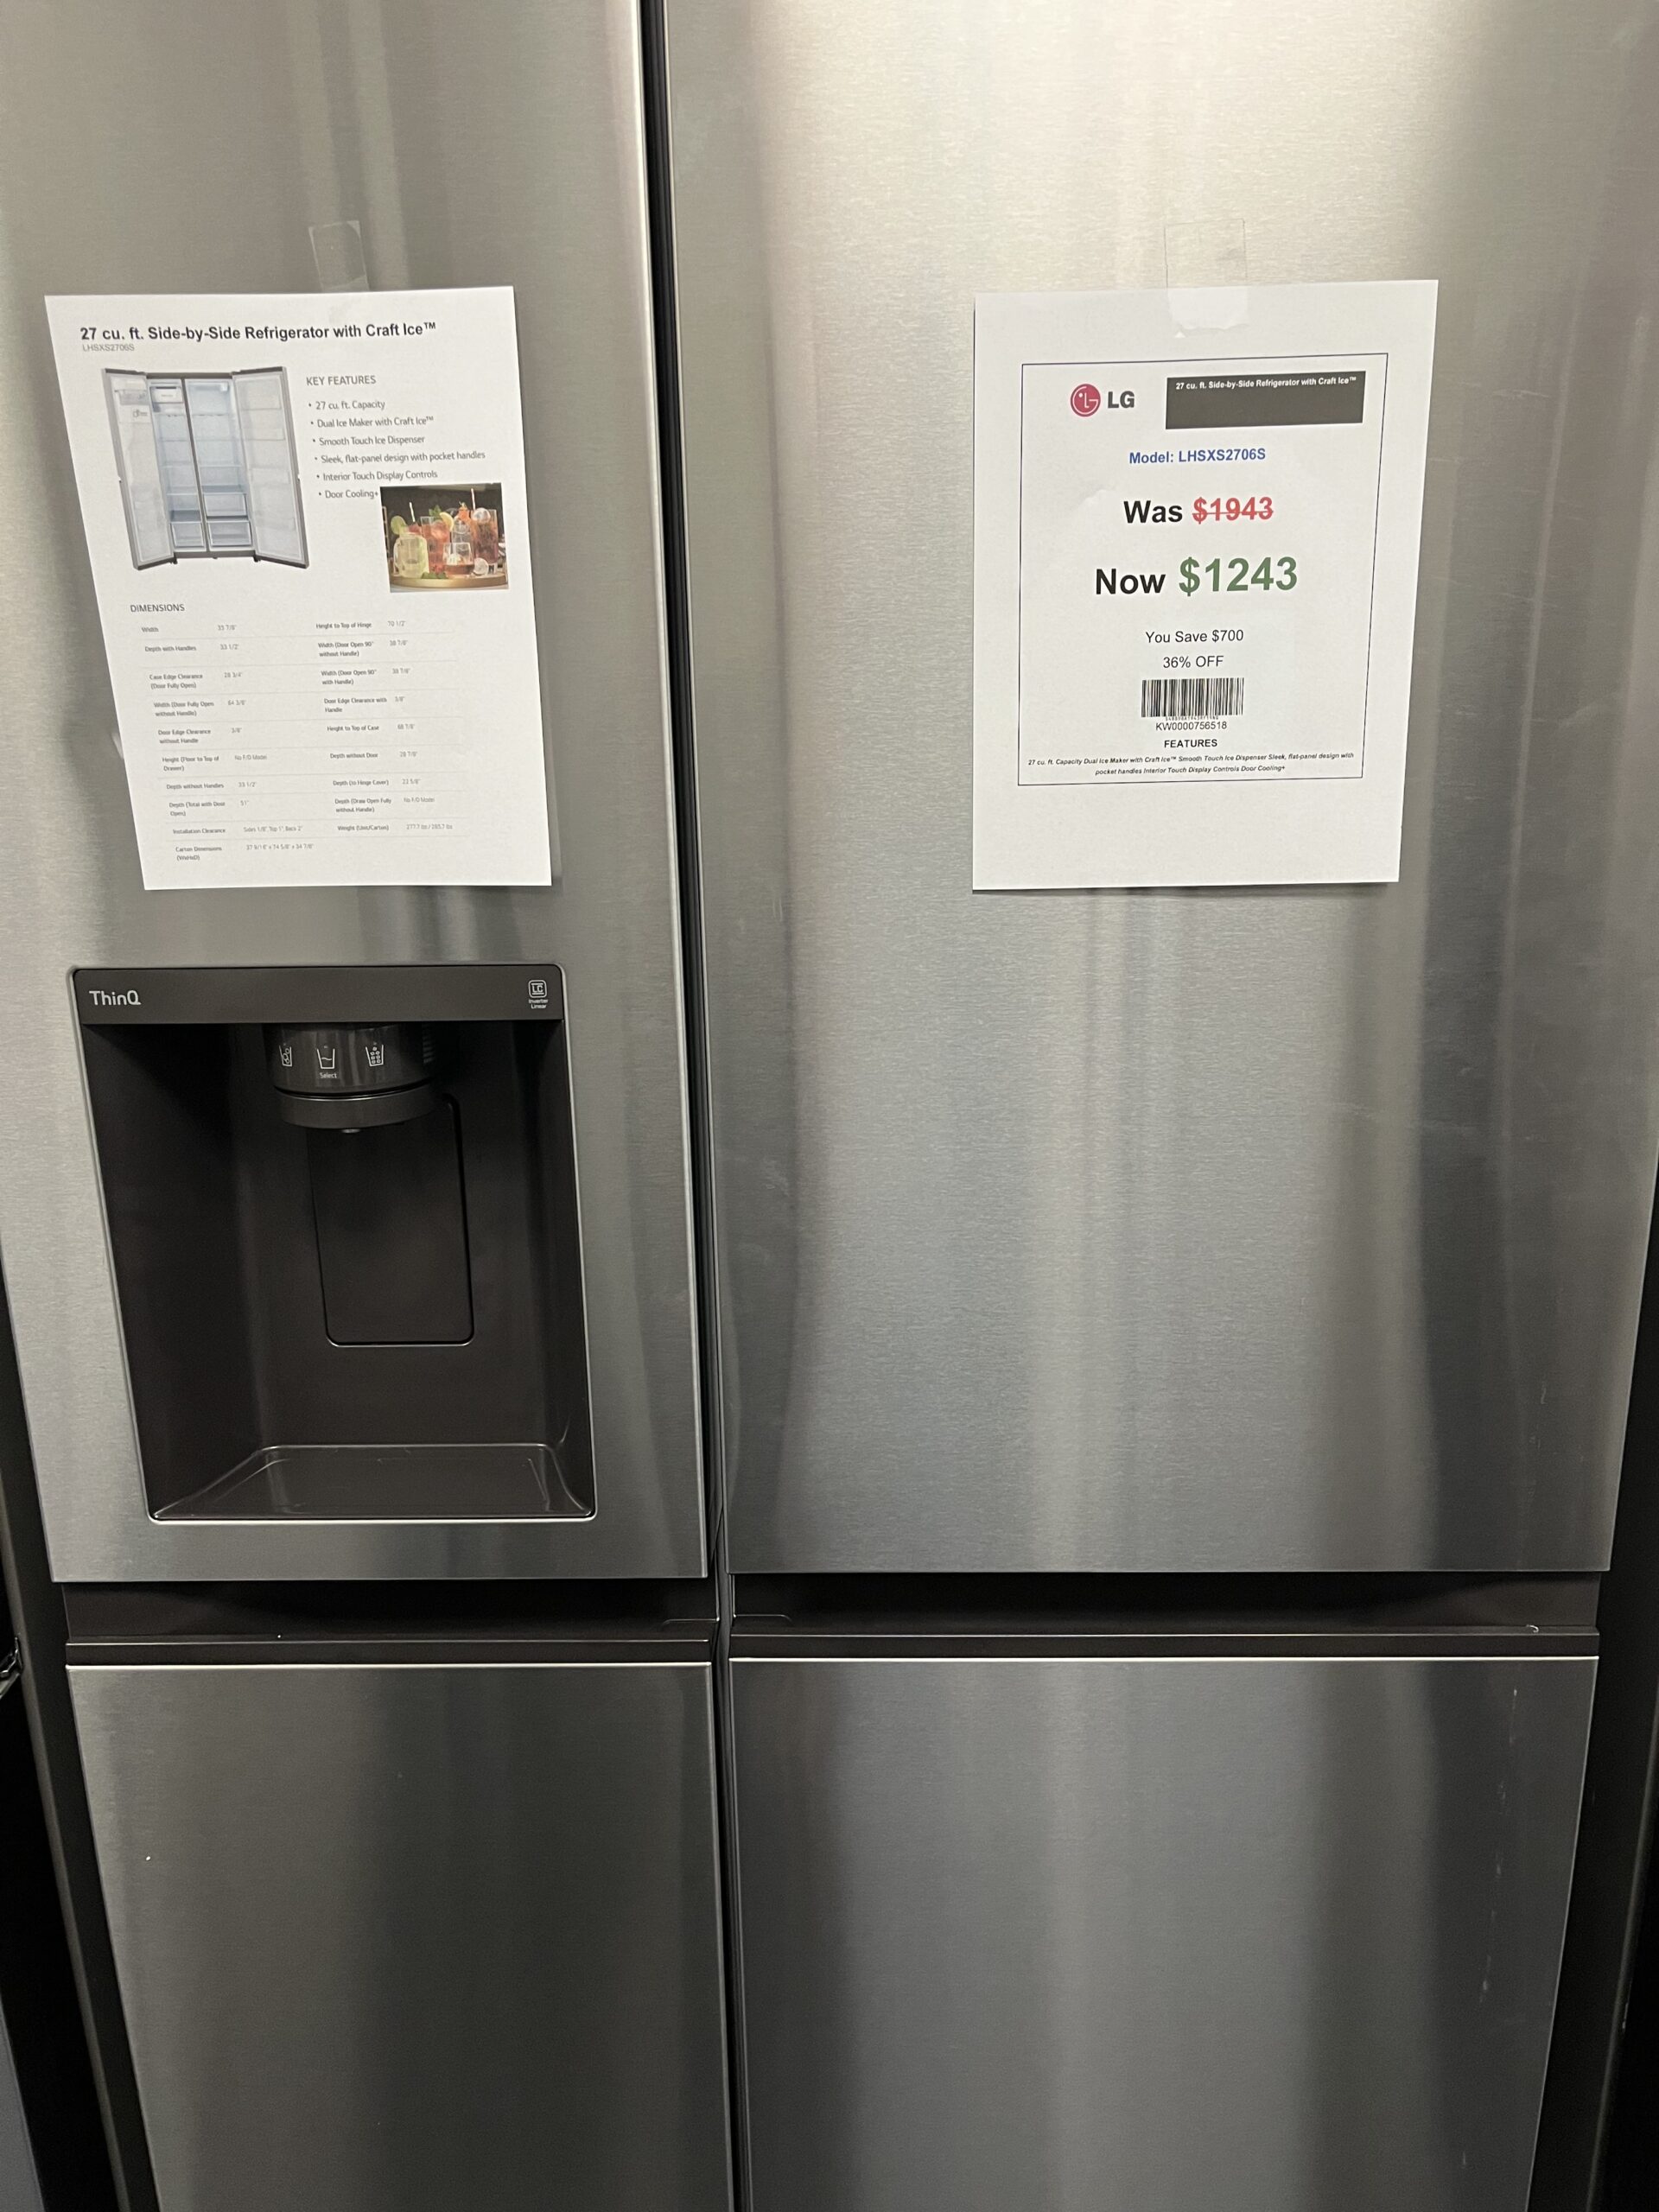 27 cu. ft. Side-by-Side Refrigerator with Craft Ice™ – Appliances 4 Less  Little Rock AR